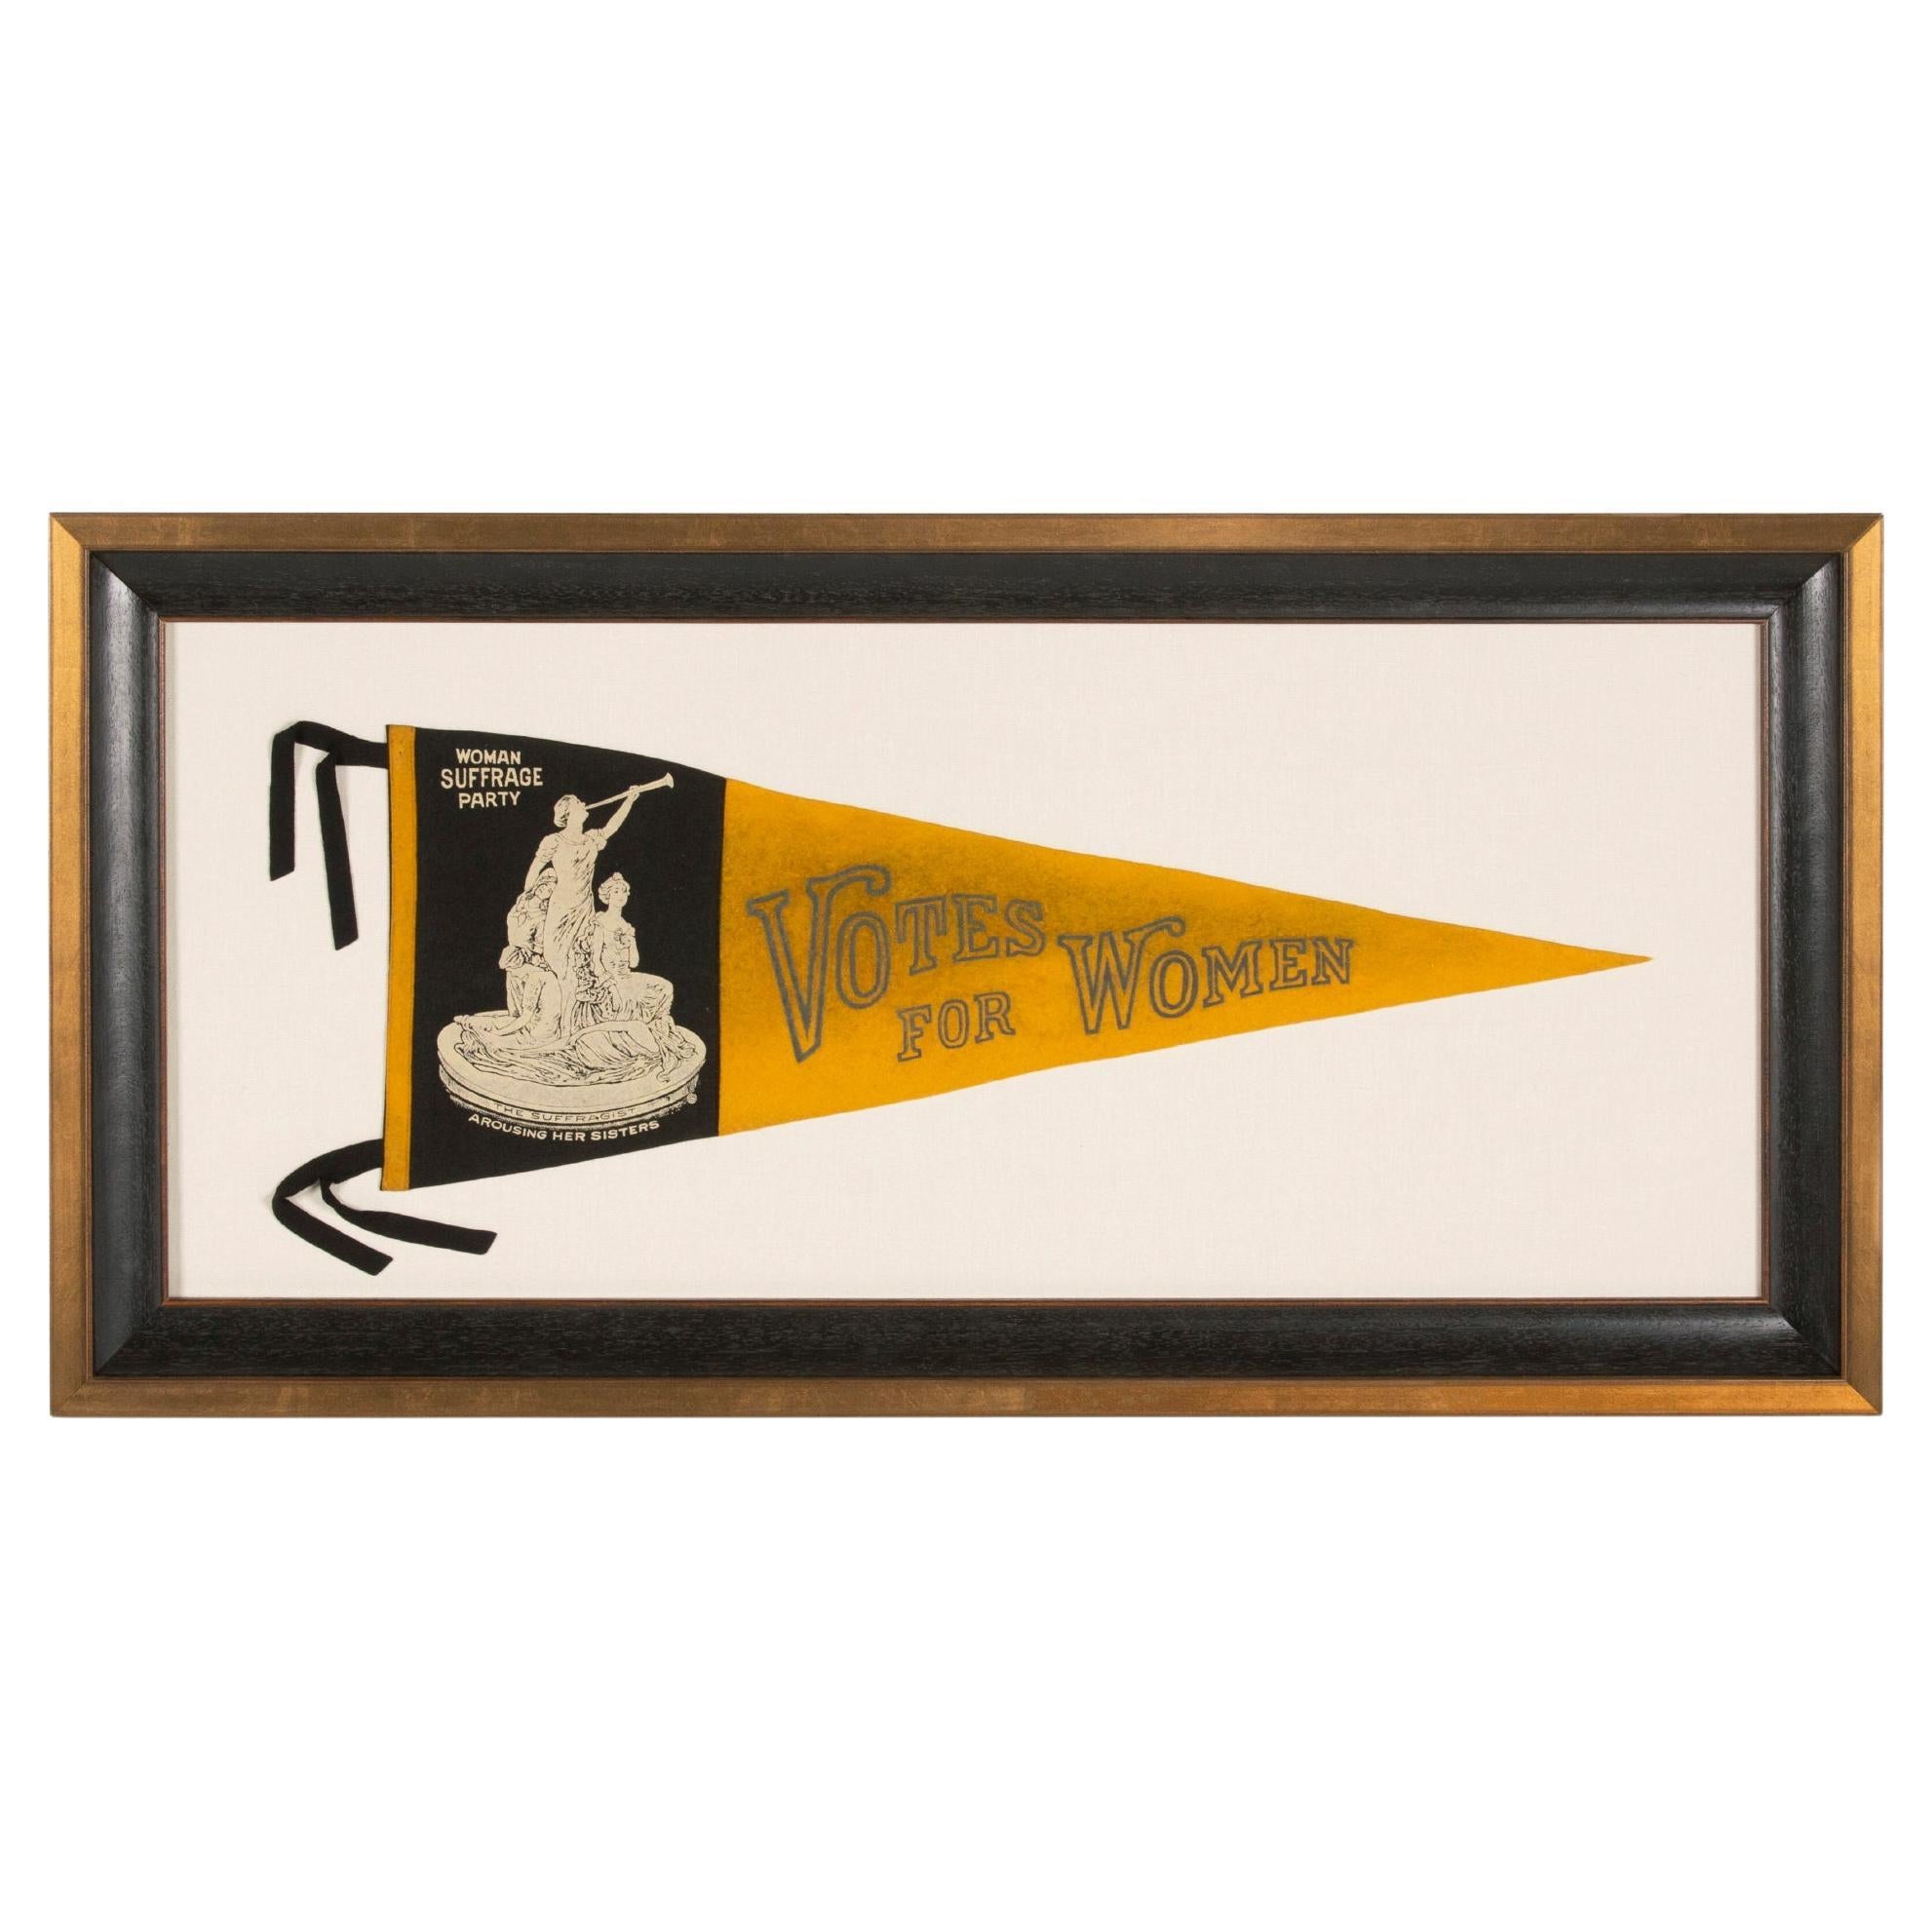 Carrie Chapmans „Frauen- Suffrage Party“  Pennant, New York City, ca. 1912-1920 im Angebot